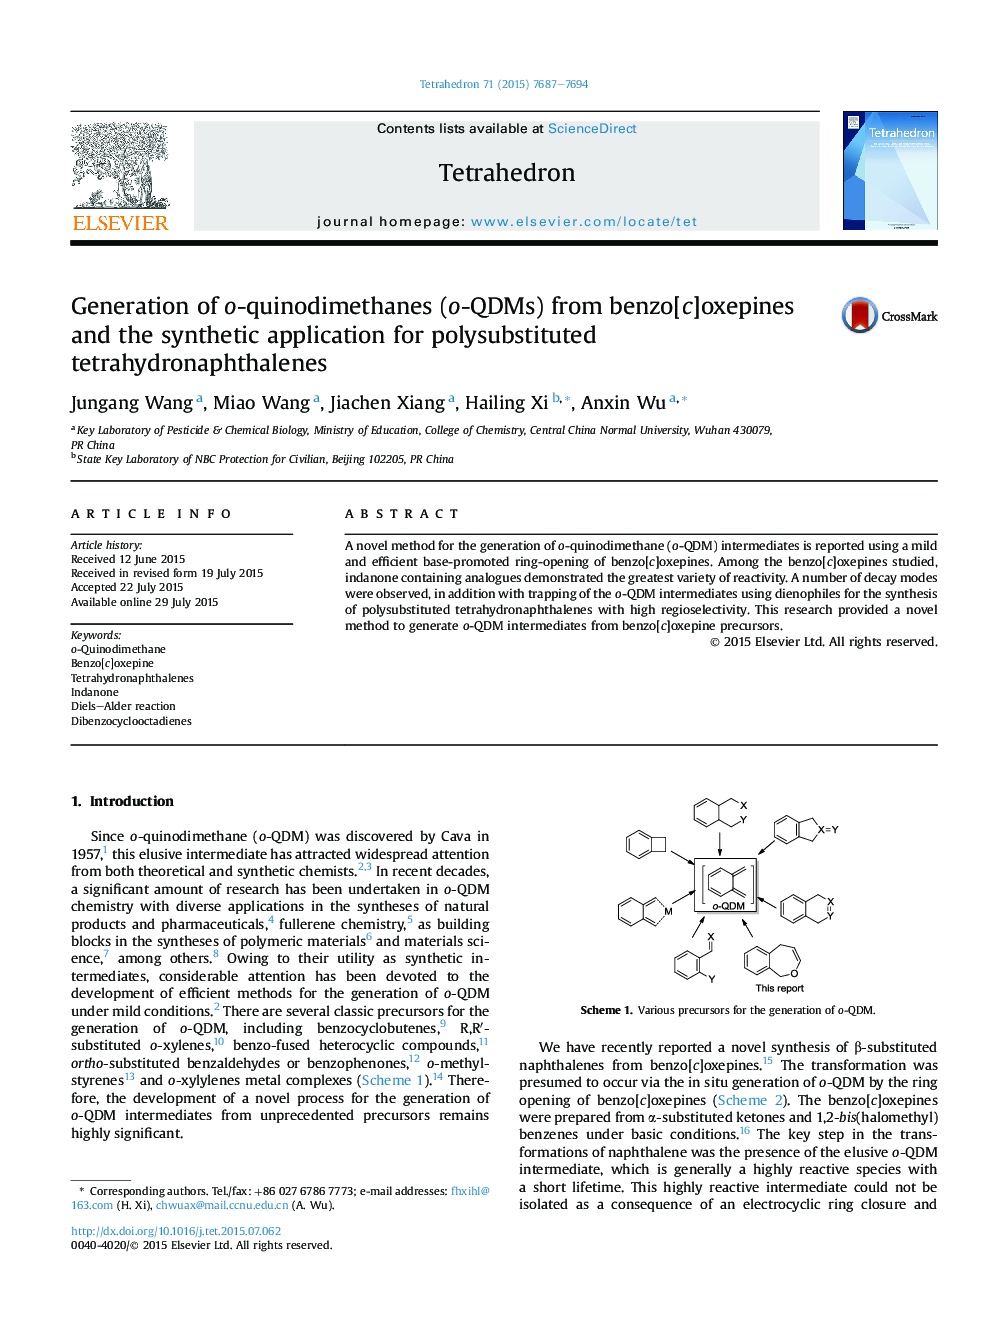 Generation of o-quinodimethanes (o-QDMs) from benzo[c]oxepines and the synthetic application for polysubstituted tetrahydronaphthalenes